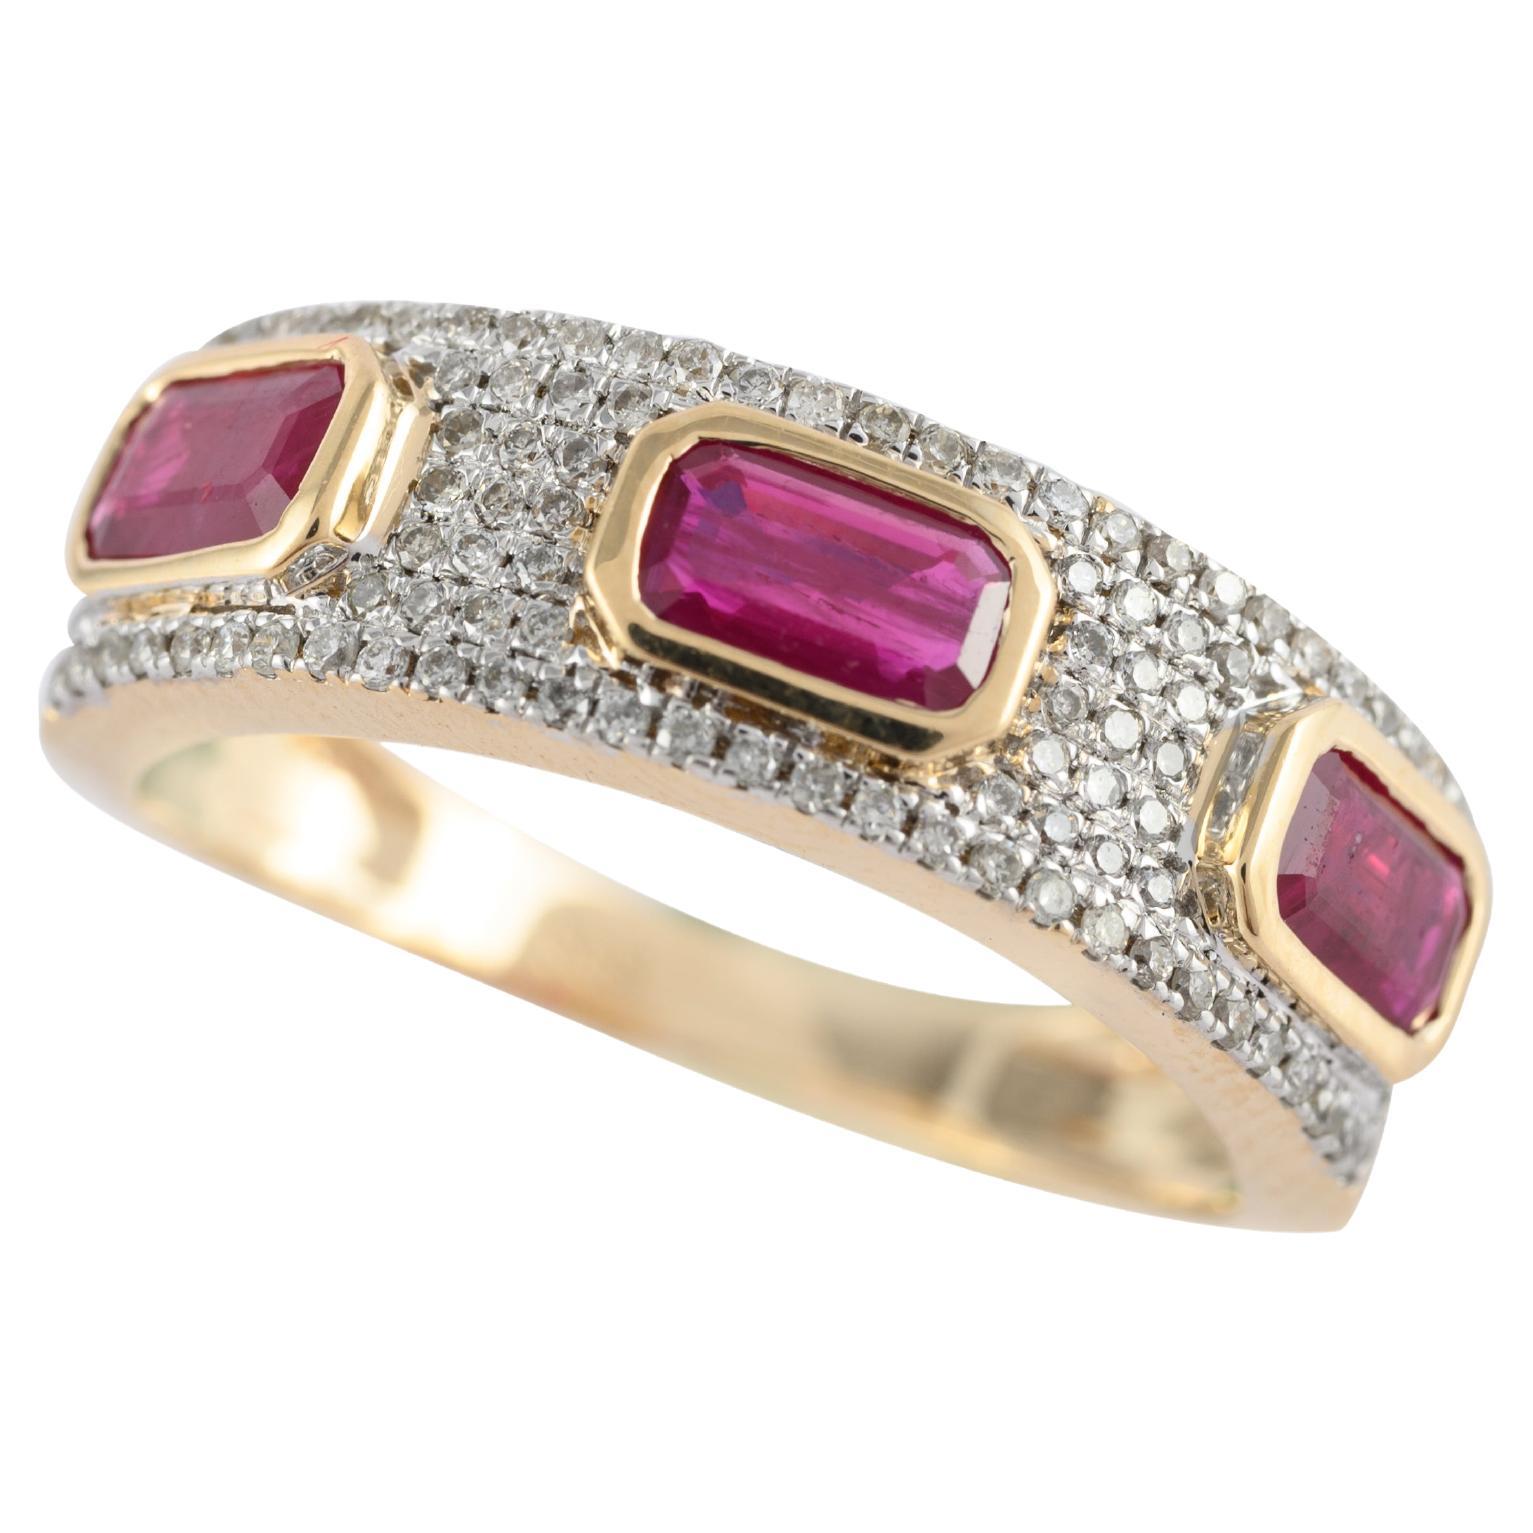 Statement Diamond Ruby Band Ring Gift for Him in 14k Solid Yellow Gold